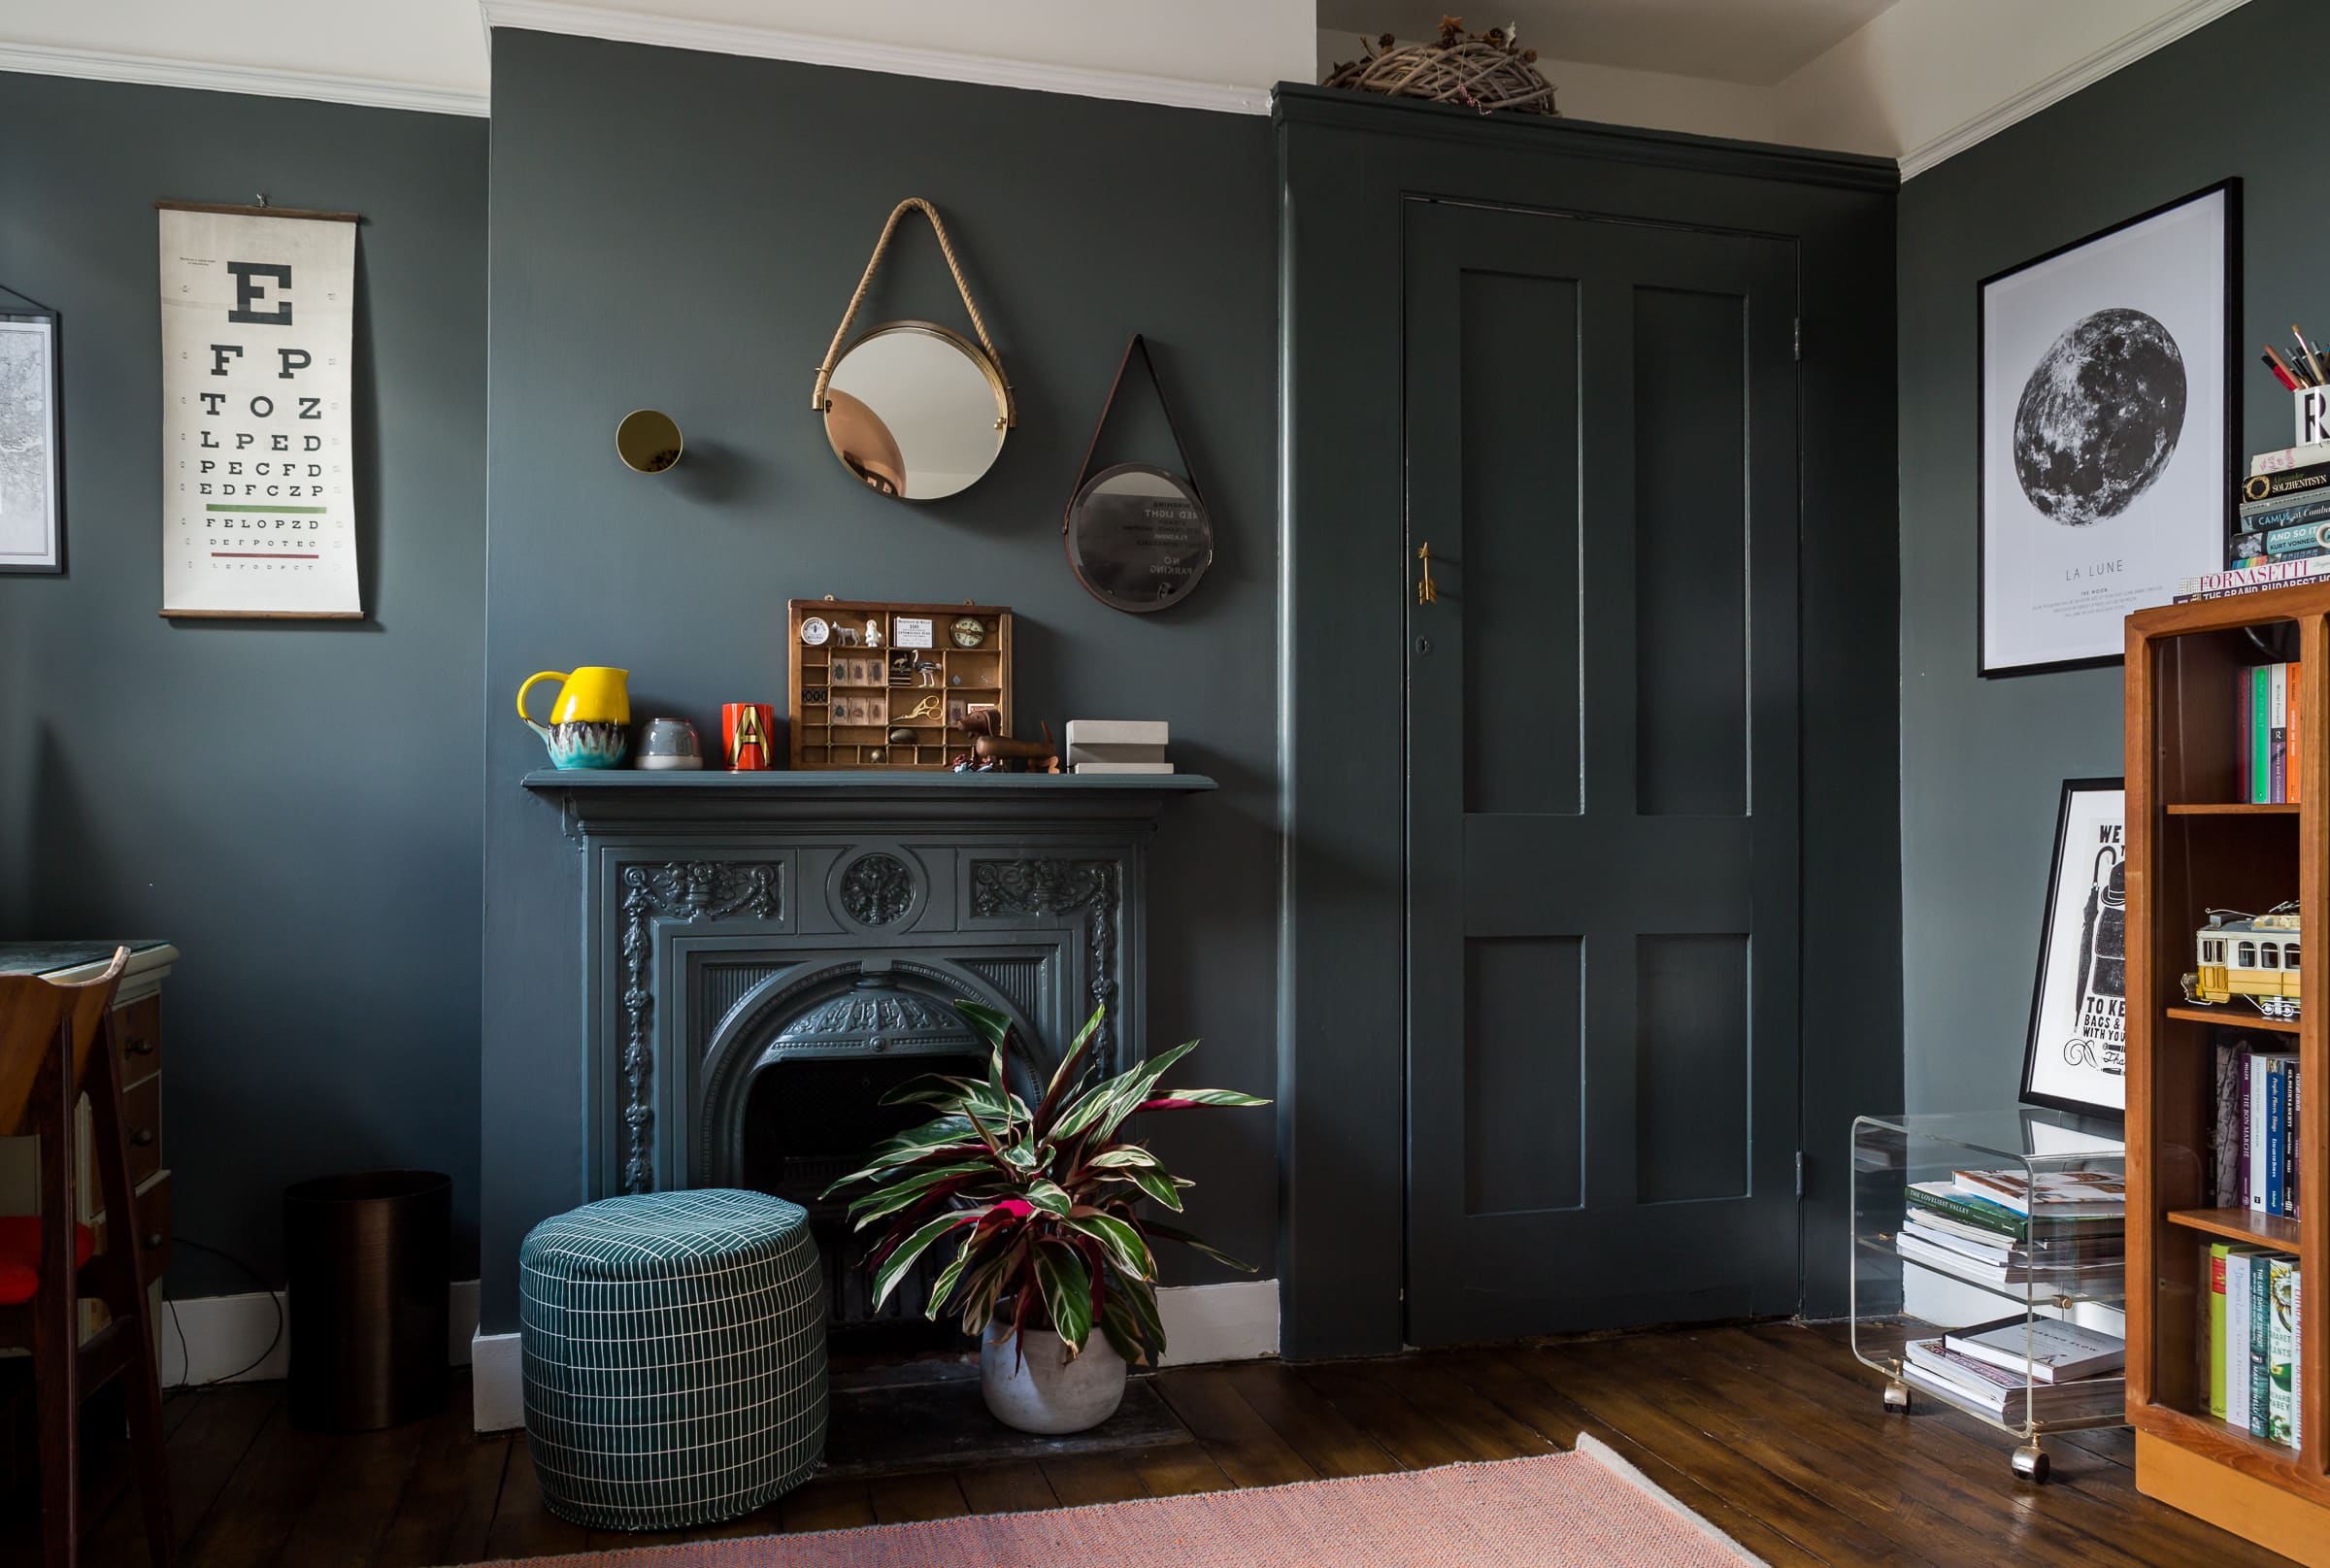 The Paint Color I *Really* Want to Use on the Walls of Our Home